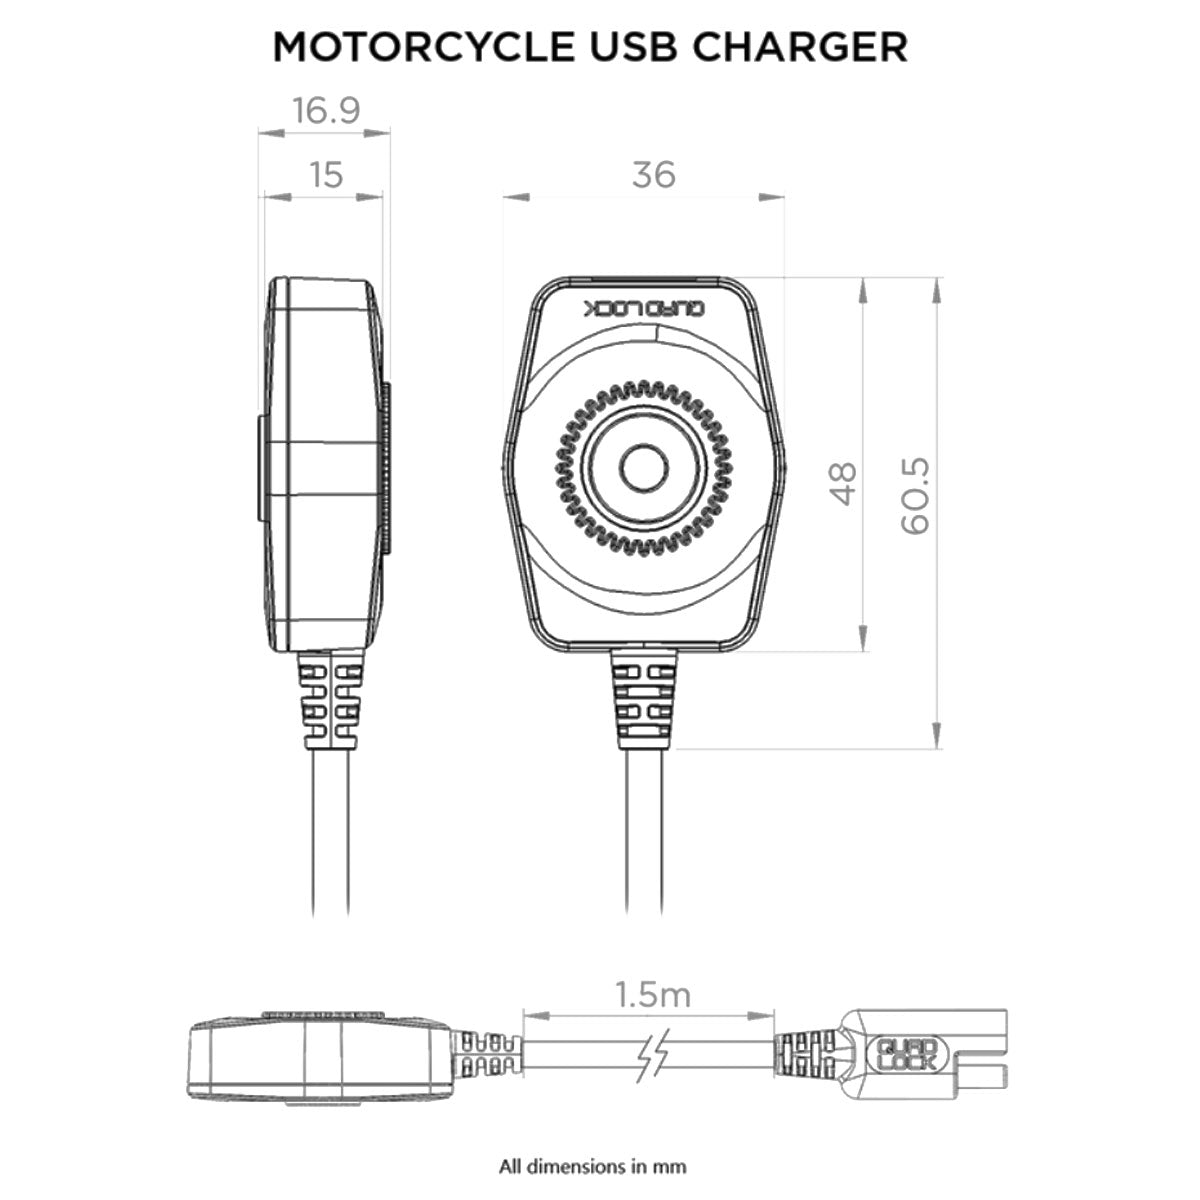 Quad Lock Motorcycle USB Charging Outlet dimensions